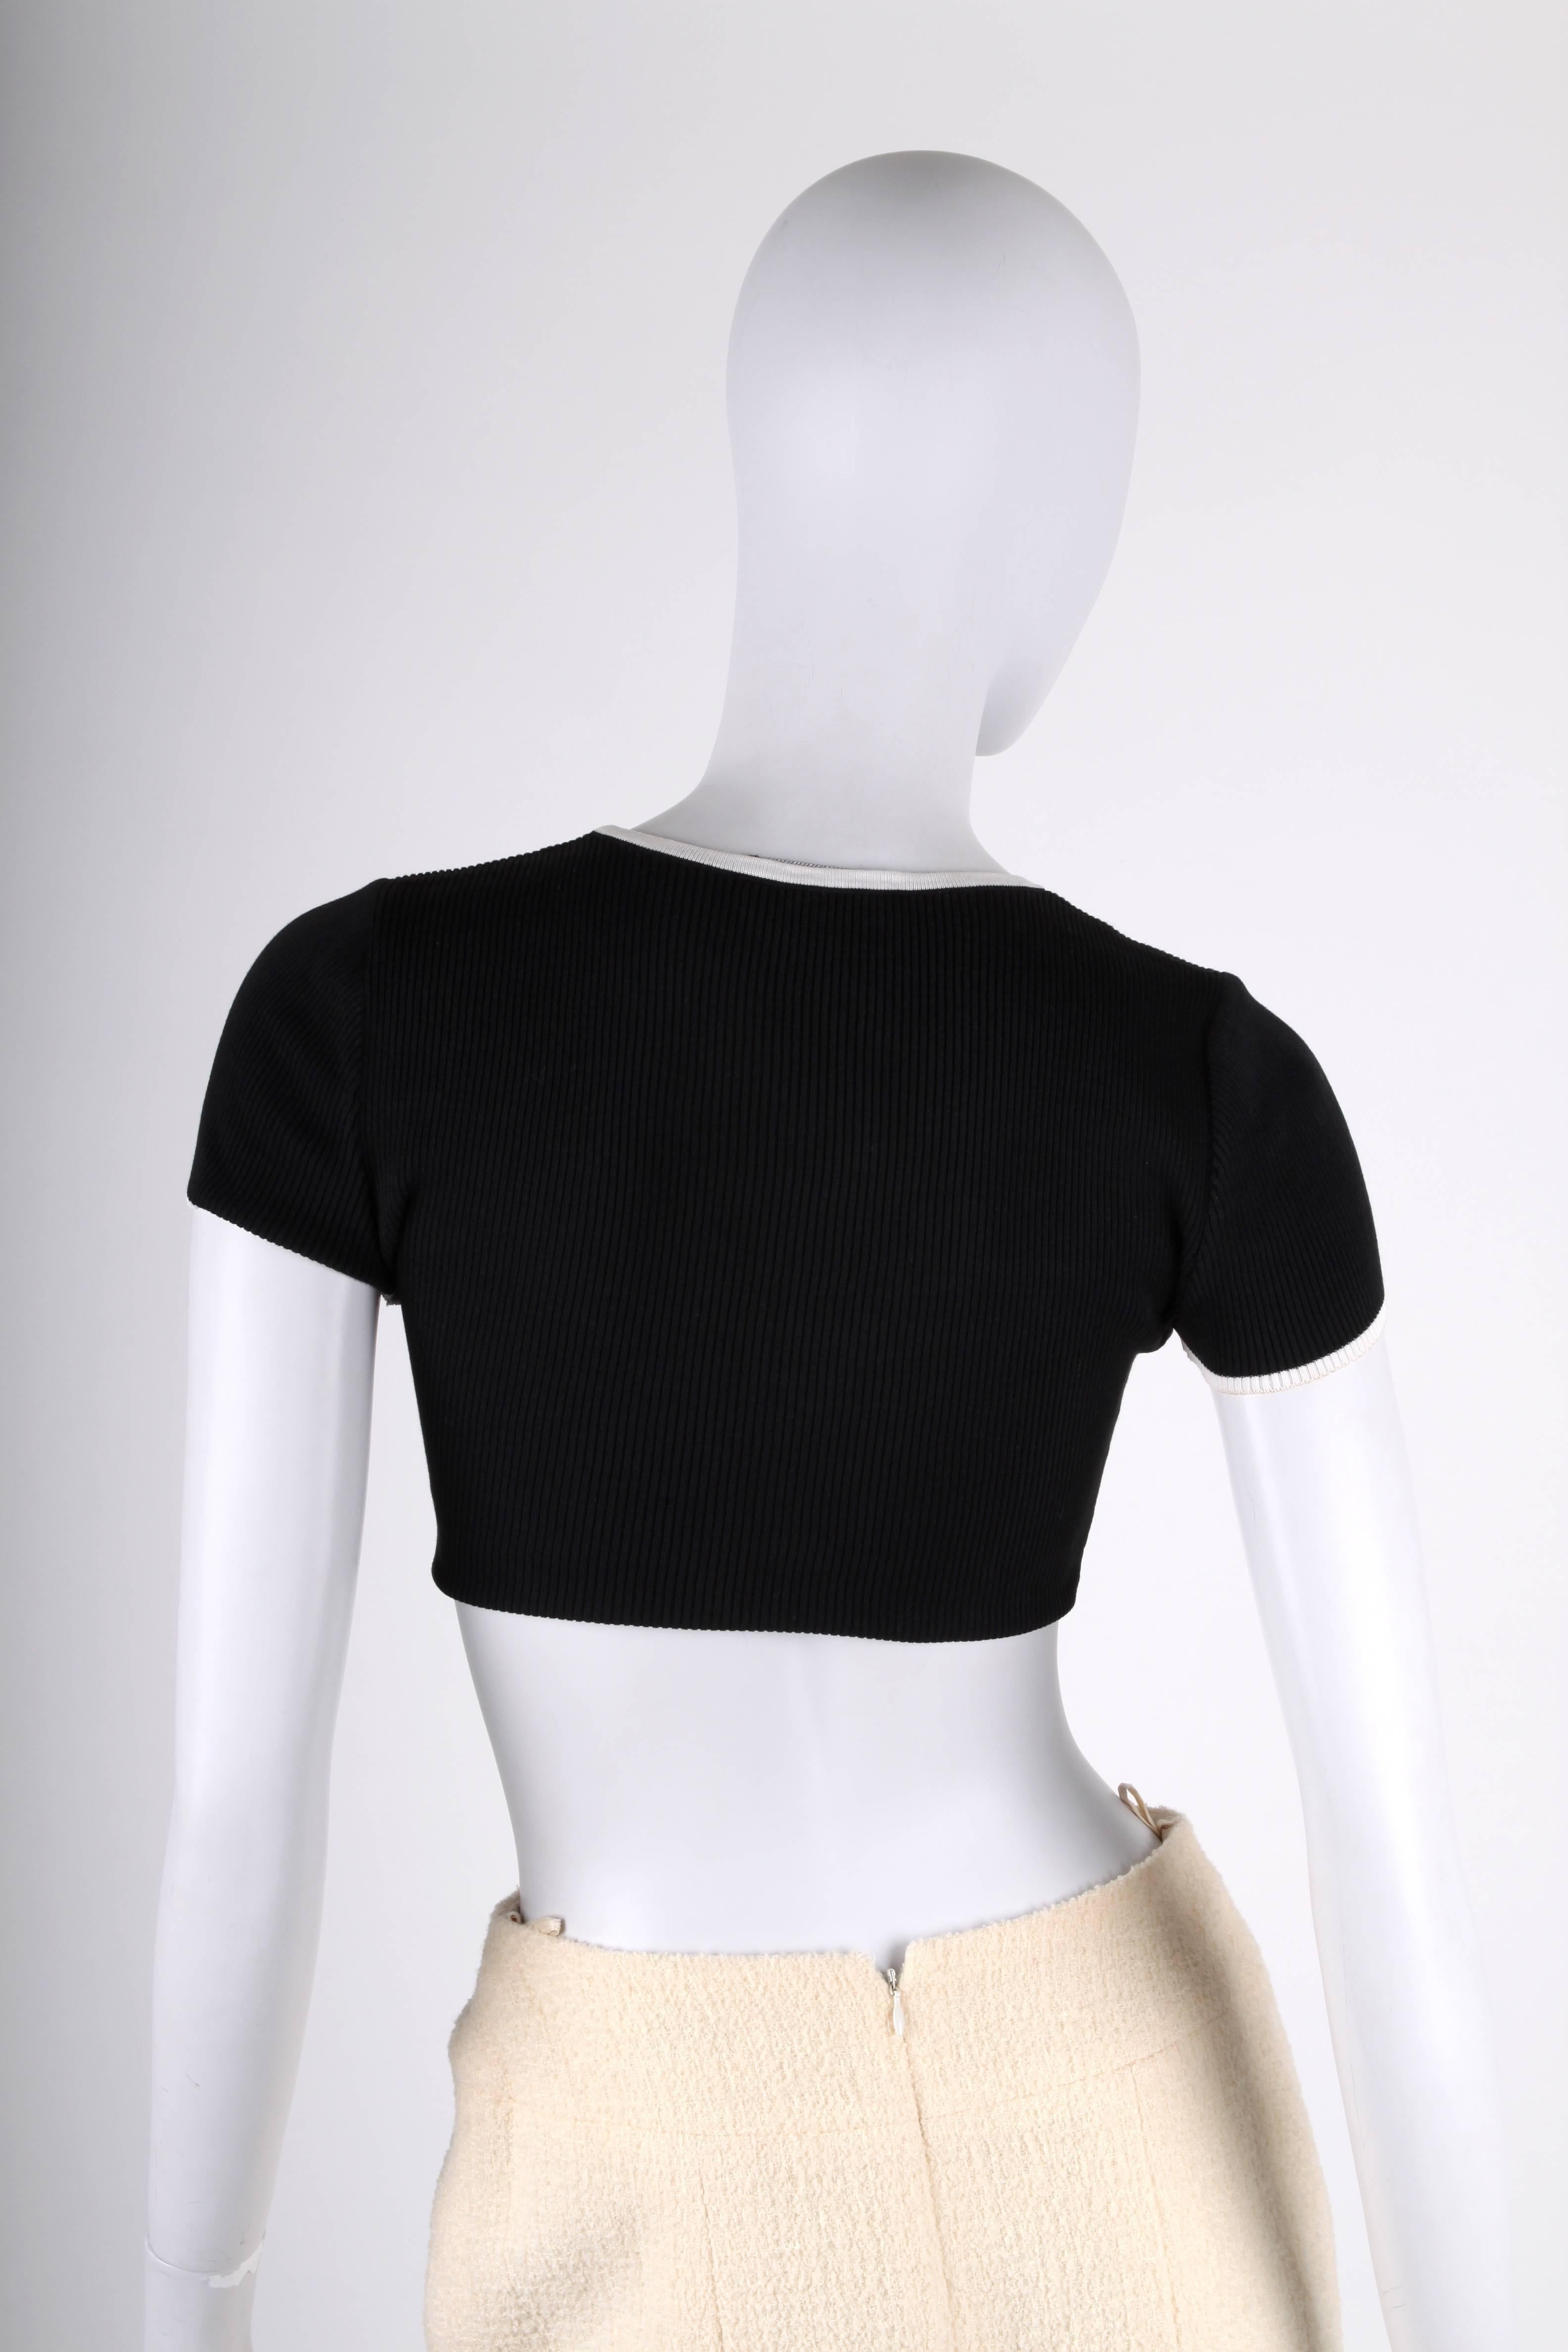 Cute little crop top by Chanel. Sweet!

Short sleeves with white piping, this piping can also be found at the round neckline and at the bottom. Right below the round neckline there is a white embroidered CC logo. Stretching material.

In fair